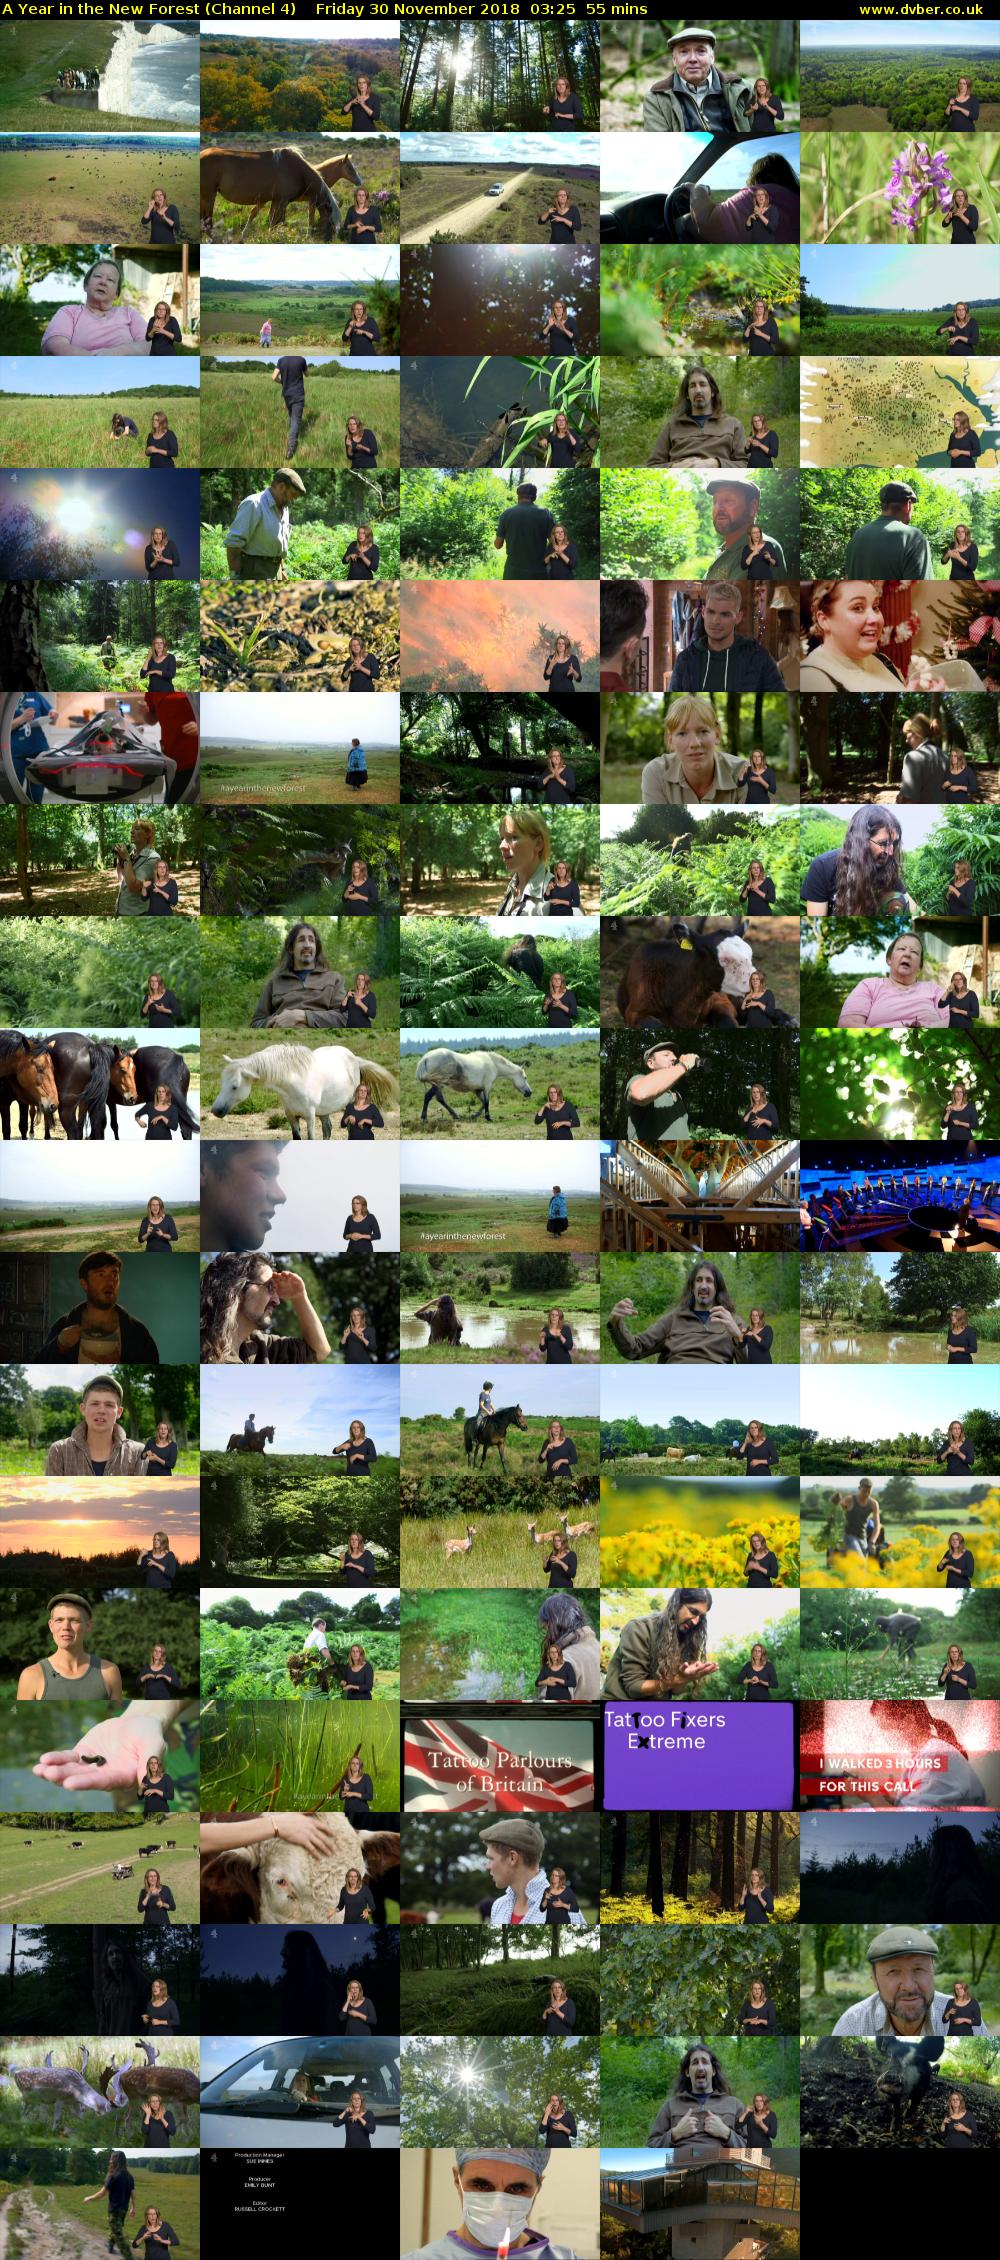 A Year in the New Forest (Channel 4) Friday 30 November 2018 03:25 - 04:20